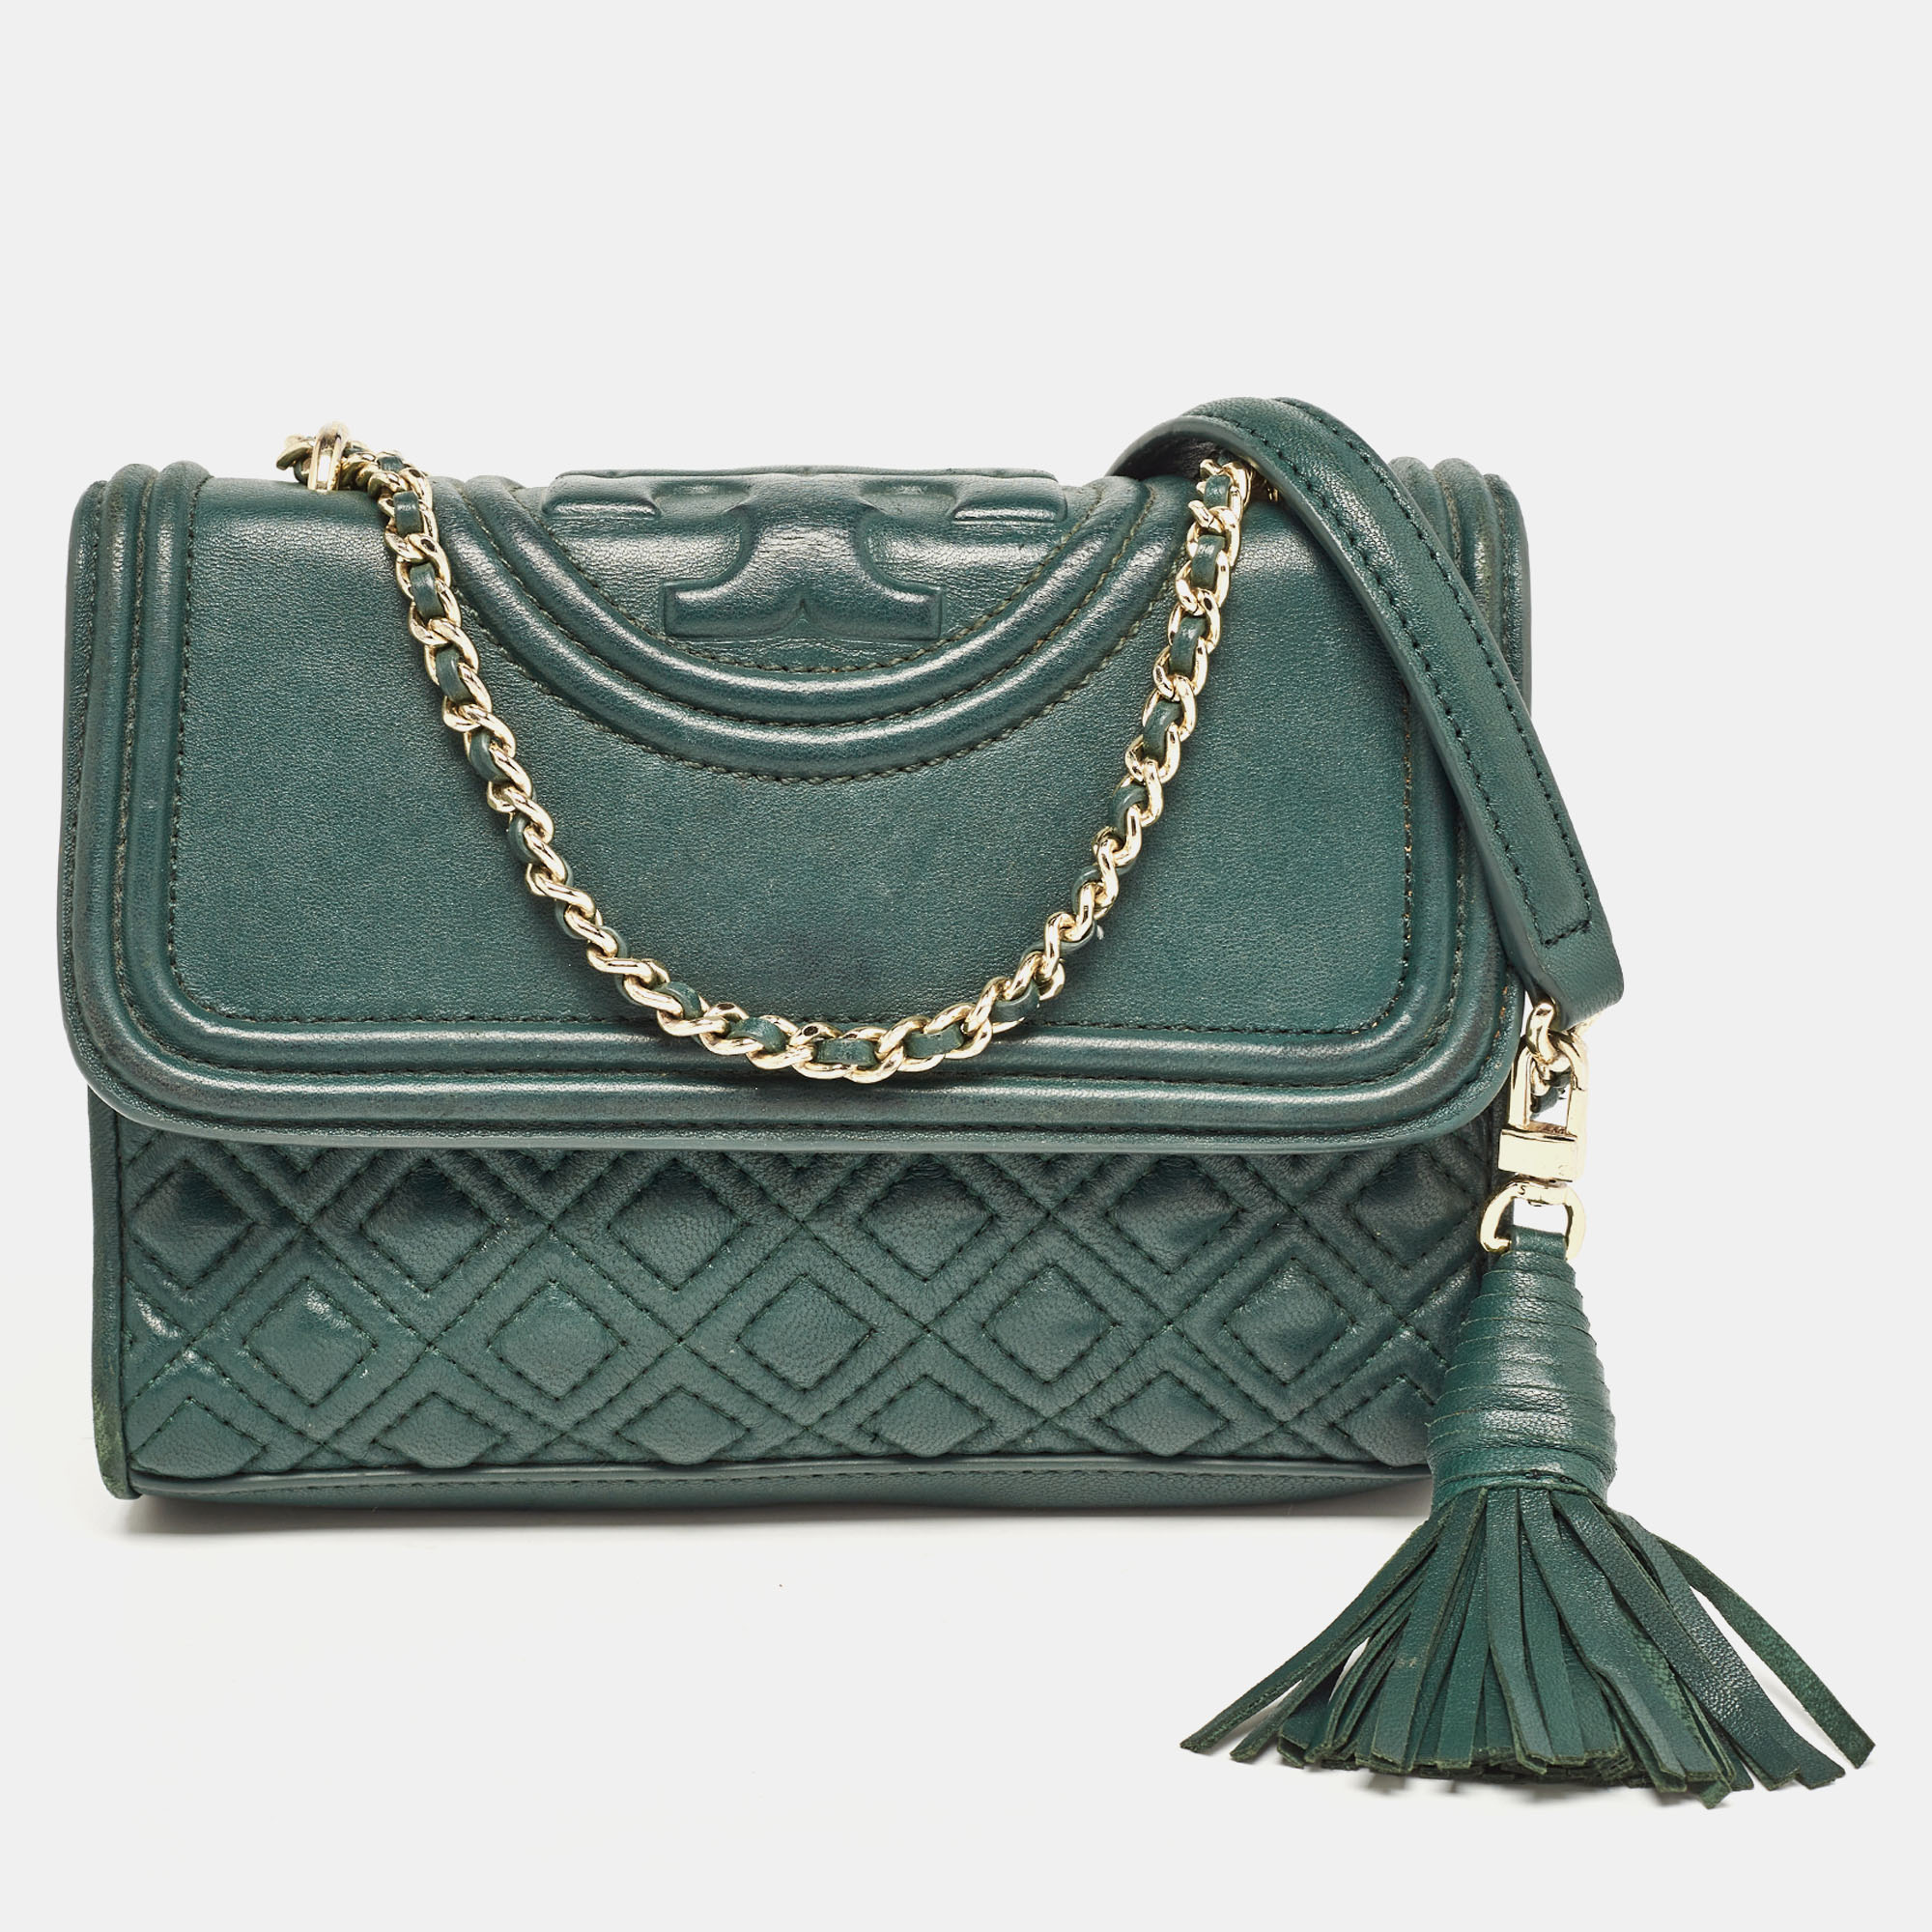 This Fleming shoulder bag from Tory Burch has been meticulously crafted from leather in a dreamy hue and designed with quilts in diamond patterns and the logo on the top. The flap opens to a fabric lined interior and the bag is held by an interwoven chain link accented with a tassel. This is a marvelous bag made just for you.